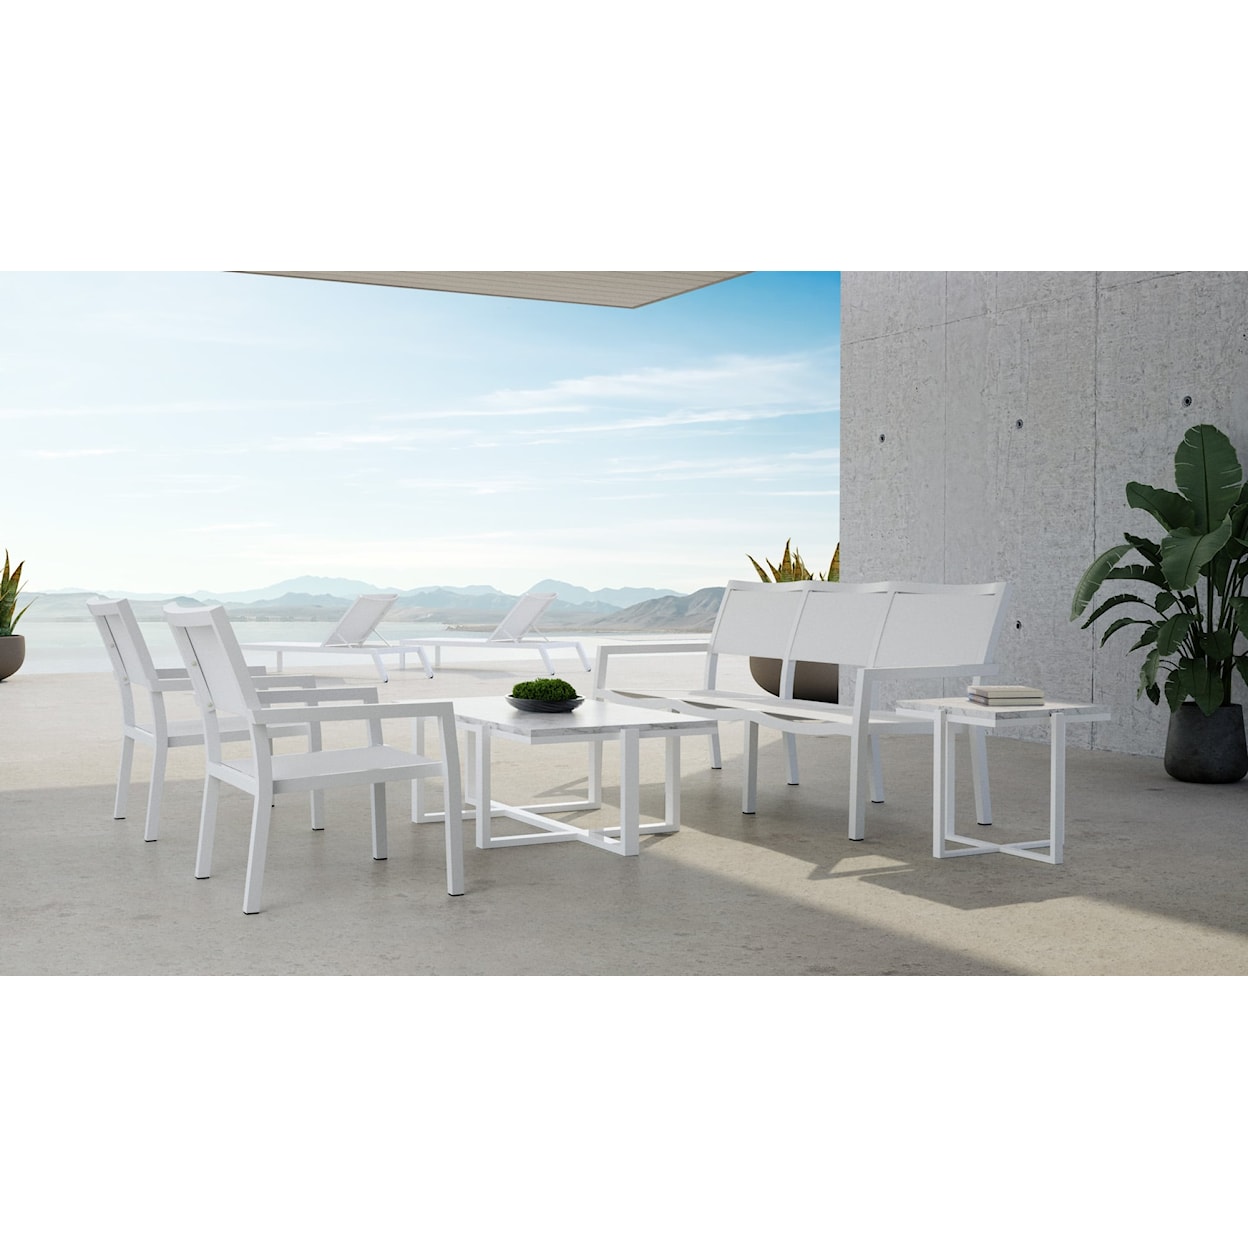 Sunset West Naples Outdoor Coffee Table